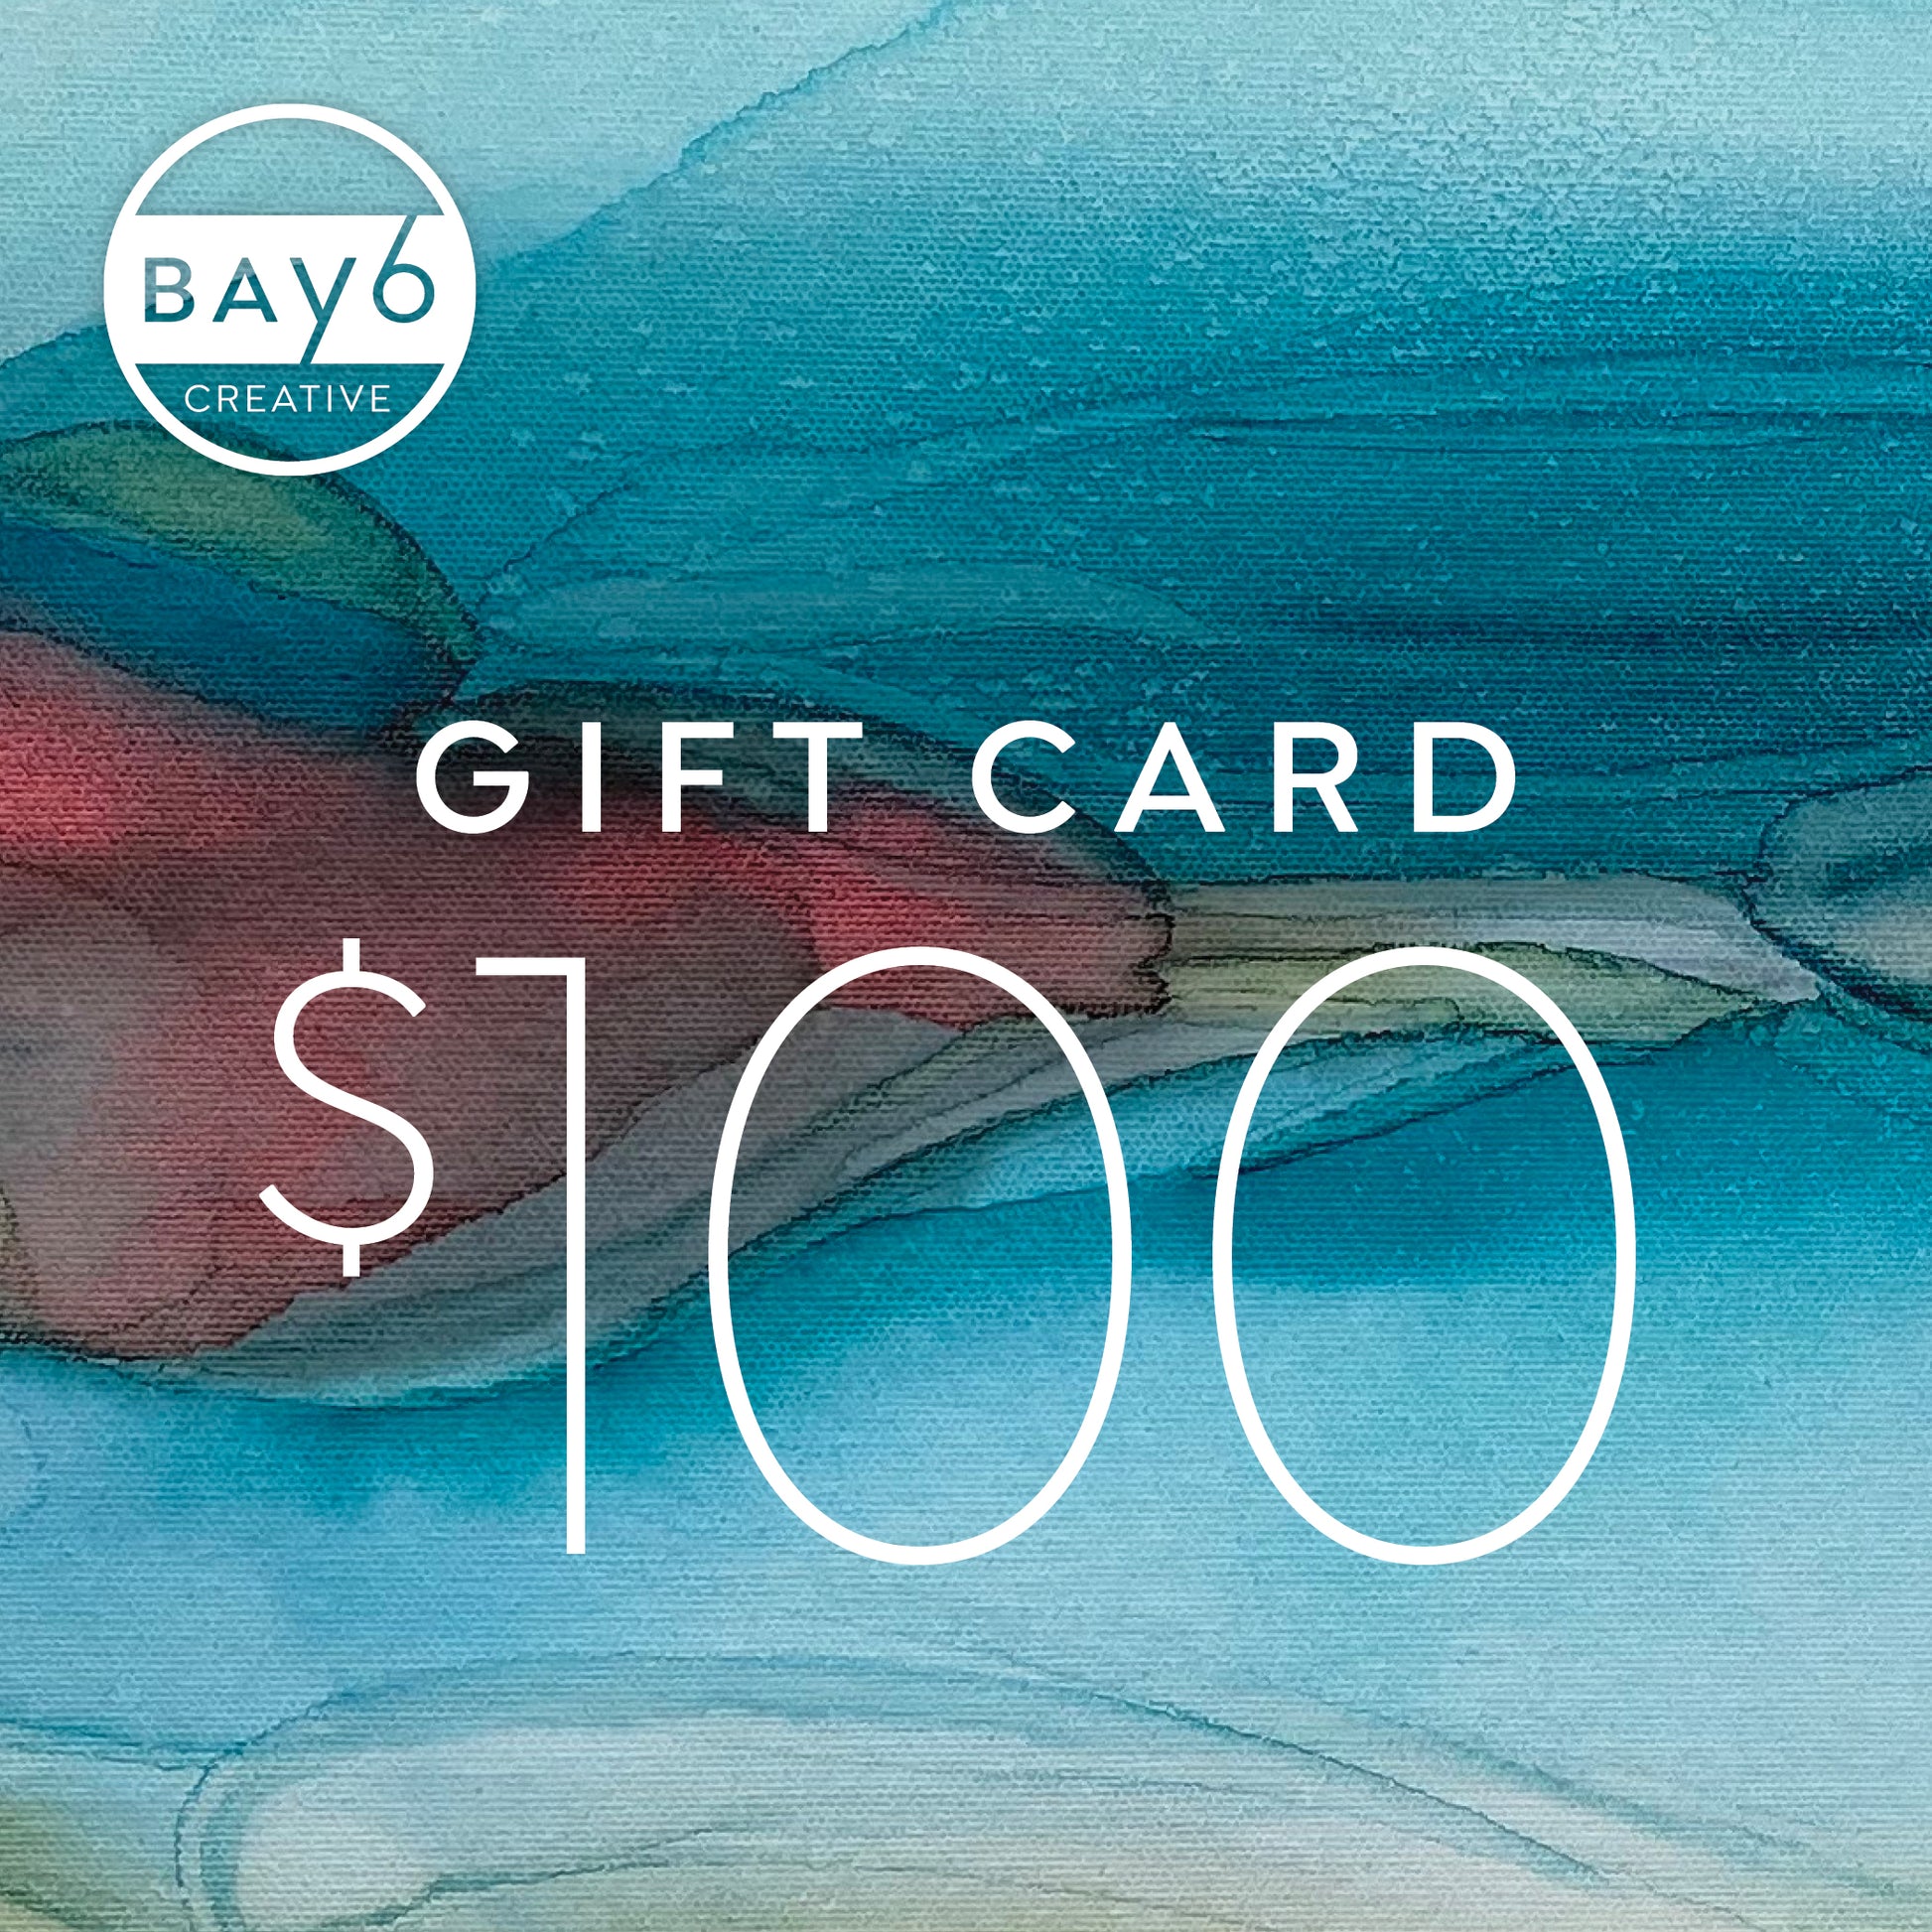 Give a $100 bay6creative gift card redeemable for exciting abstract artwork right here in our online store